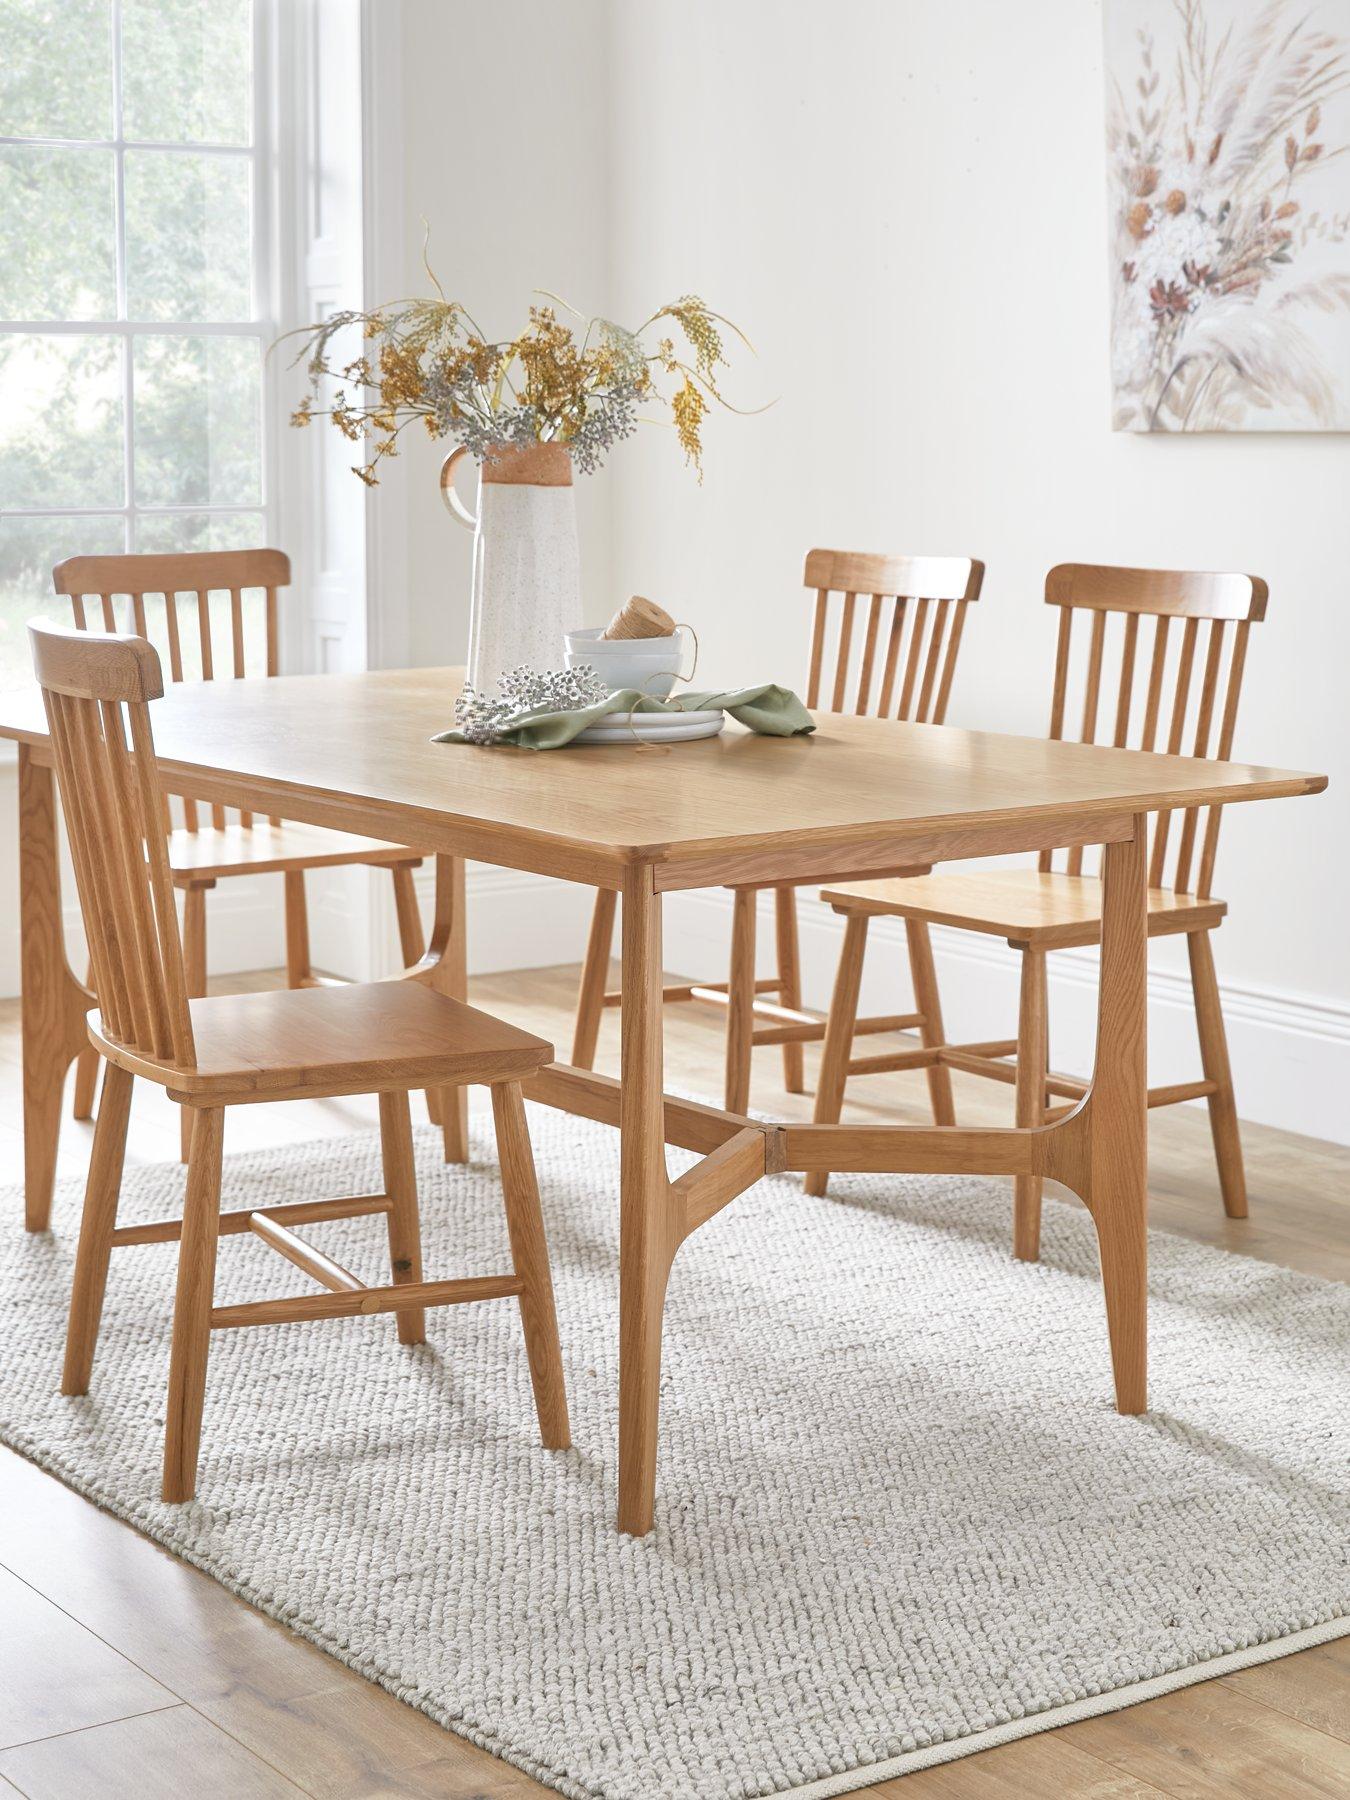 Very Home Camborne 180 Cm Dining Table + 4 Chairs - Fsc Certified